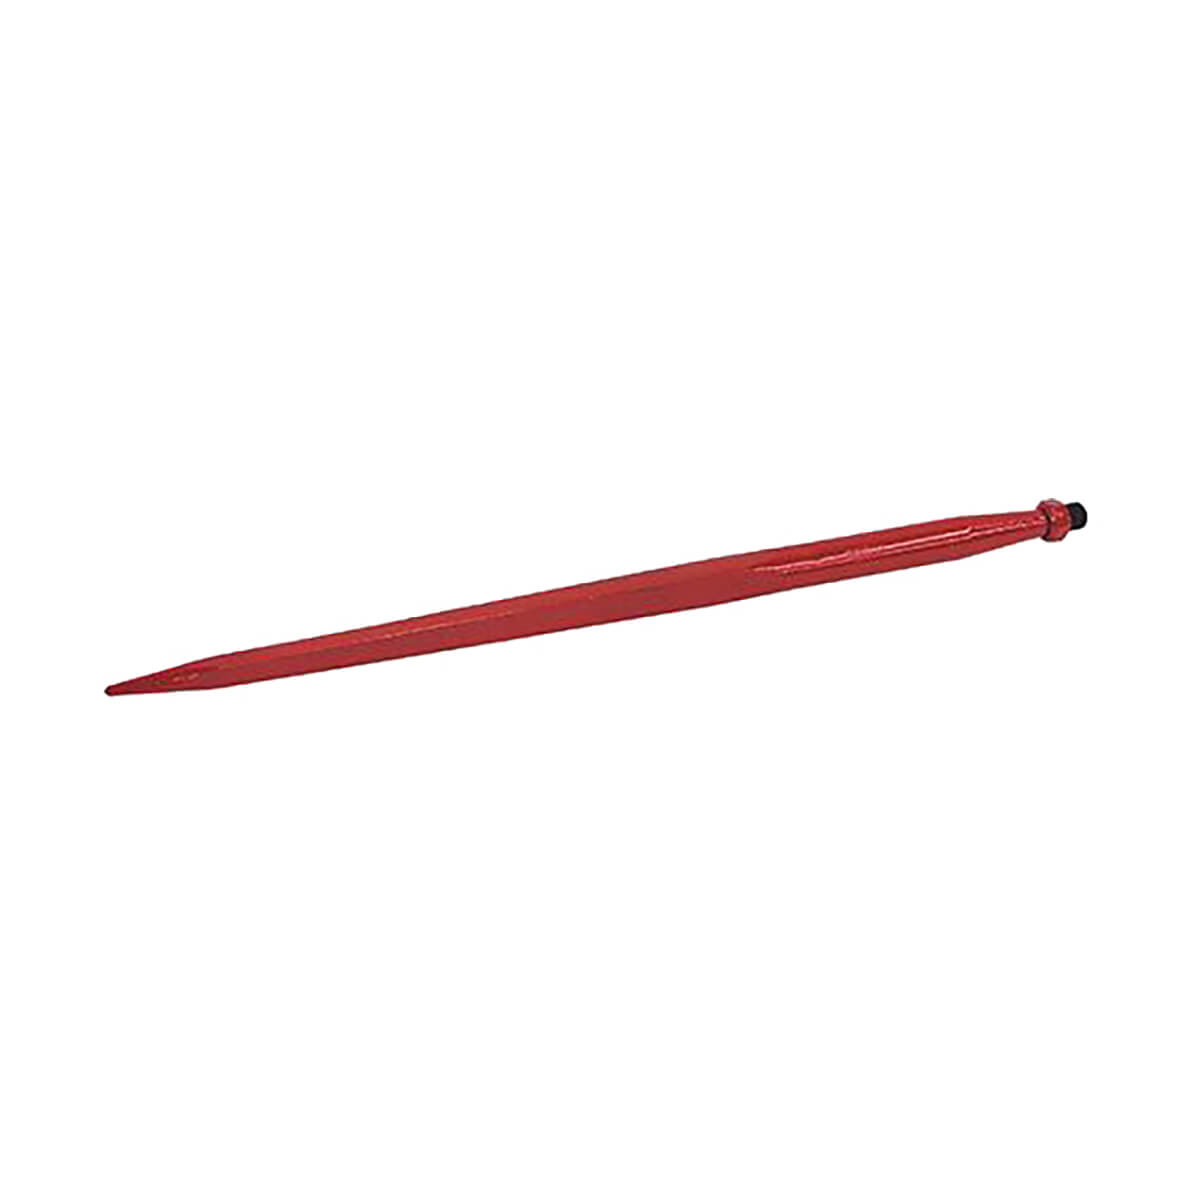 Replacement Bale Spear - 48 in